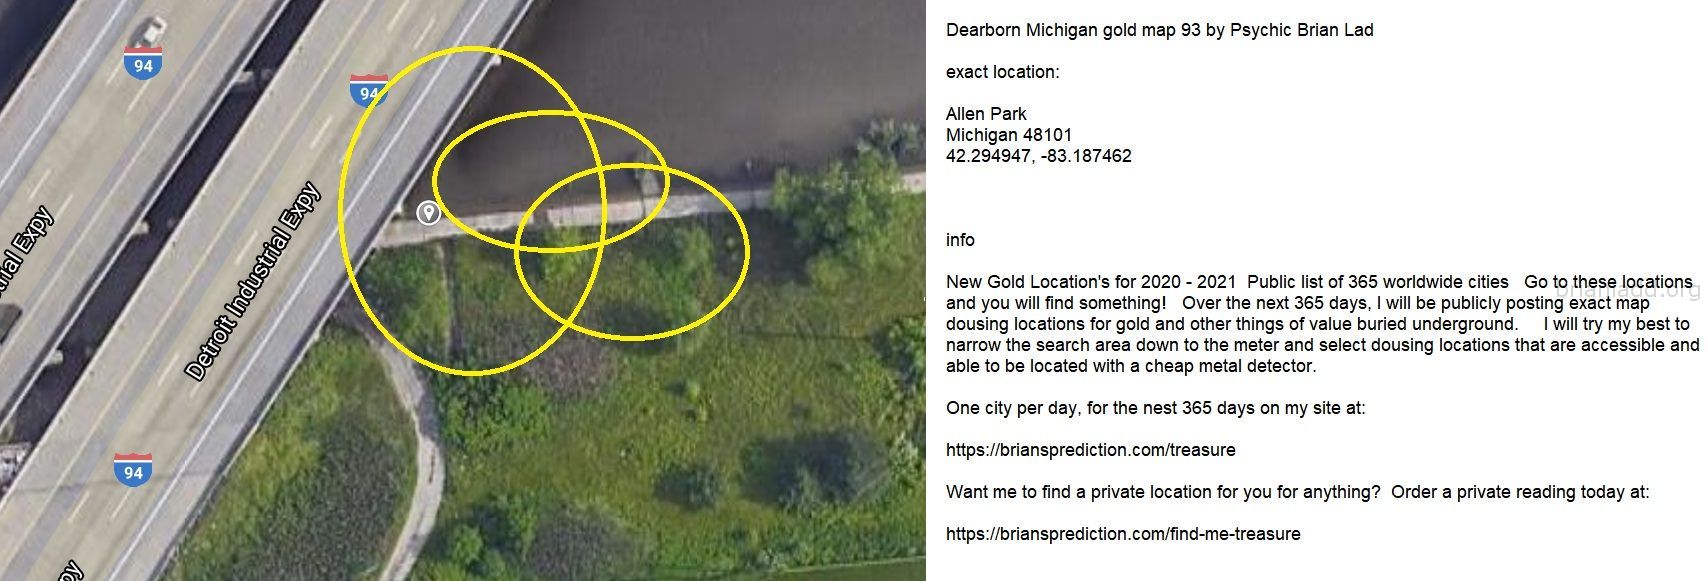 Dearborn Michigan gold map 93 by Psychic Brian Ladd
New Gold Location's for 2020 - 2021  Public list of 365 worldwide cities   Go to these locations and you will find something!   Over the next 365 days, I will be publicly posting exact map dousing locations for gold and other things of value buried underground.     I will try my best to narrow the search area down to the meter and select dousing locations that are accessible and able to be located with a cheap metal detector. One city per day, for the nest 365 days on my site at:  https://briansprediction.com/treasure  Want me to find a private location for you for anything?  Order a private reading today at:  https://briansprediction.com/find-me-treasure
